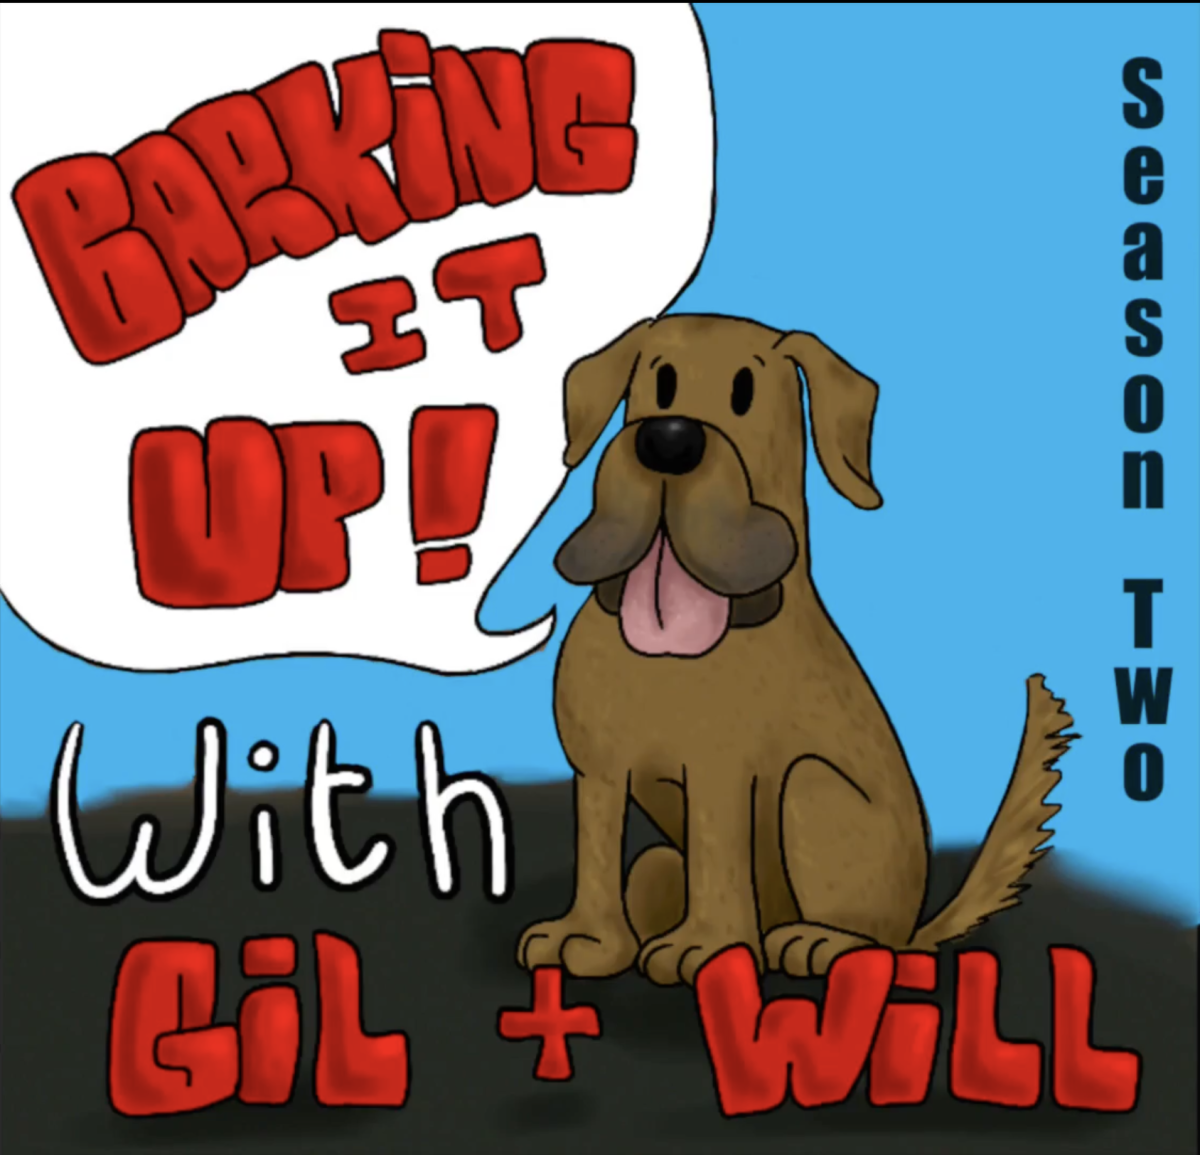 SZN 2 EP 4: Barking It Up With Gil & Will ft. Presley Pewitt